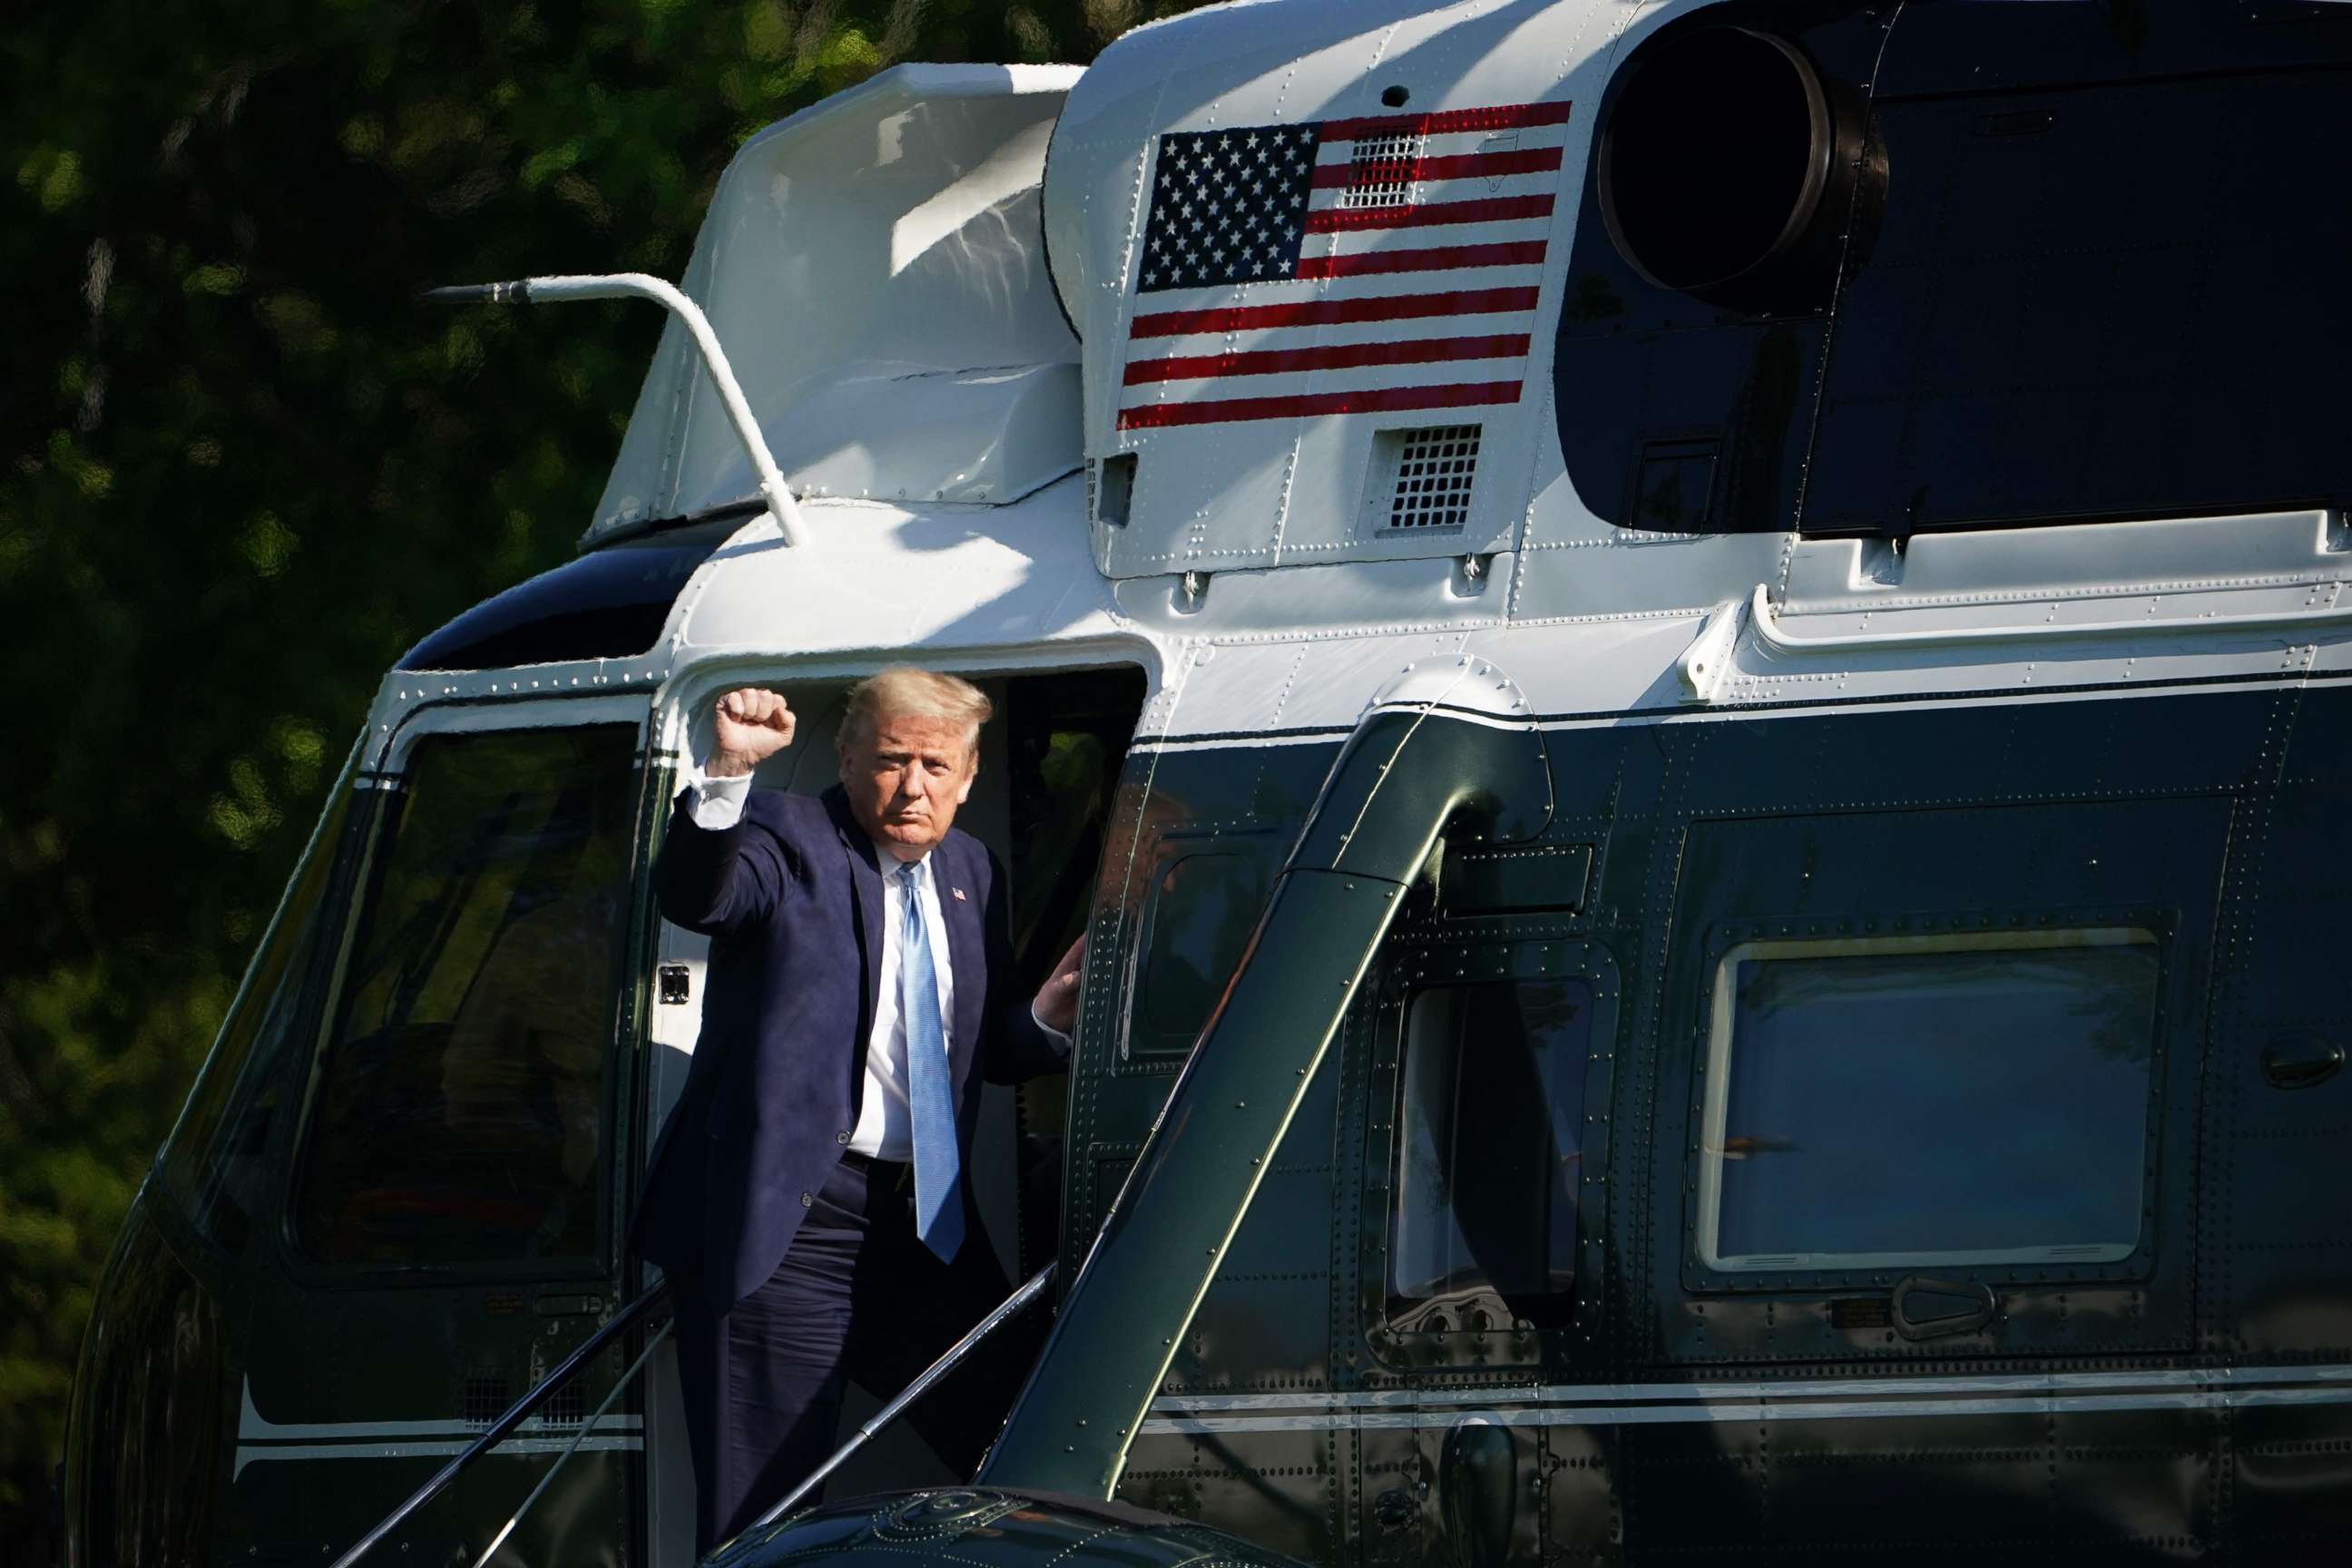 PHOTO: President Donald Trump makes makes a fist as he boards Marine One before departing from the South Lawn of the White House in Washington, May 15, 2020.